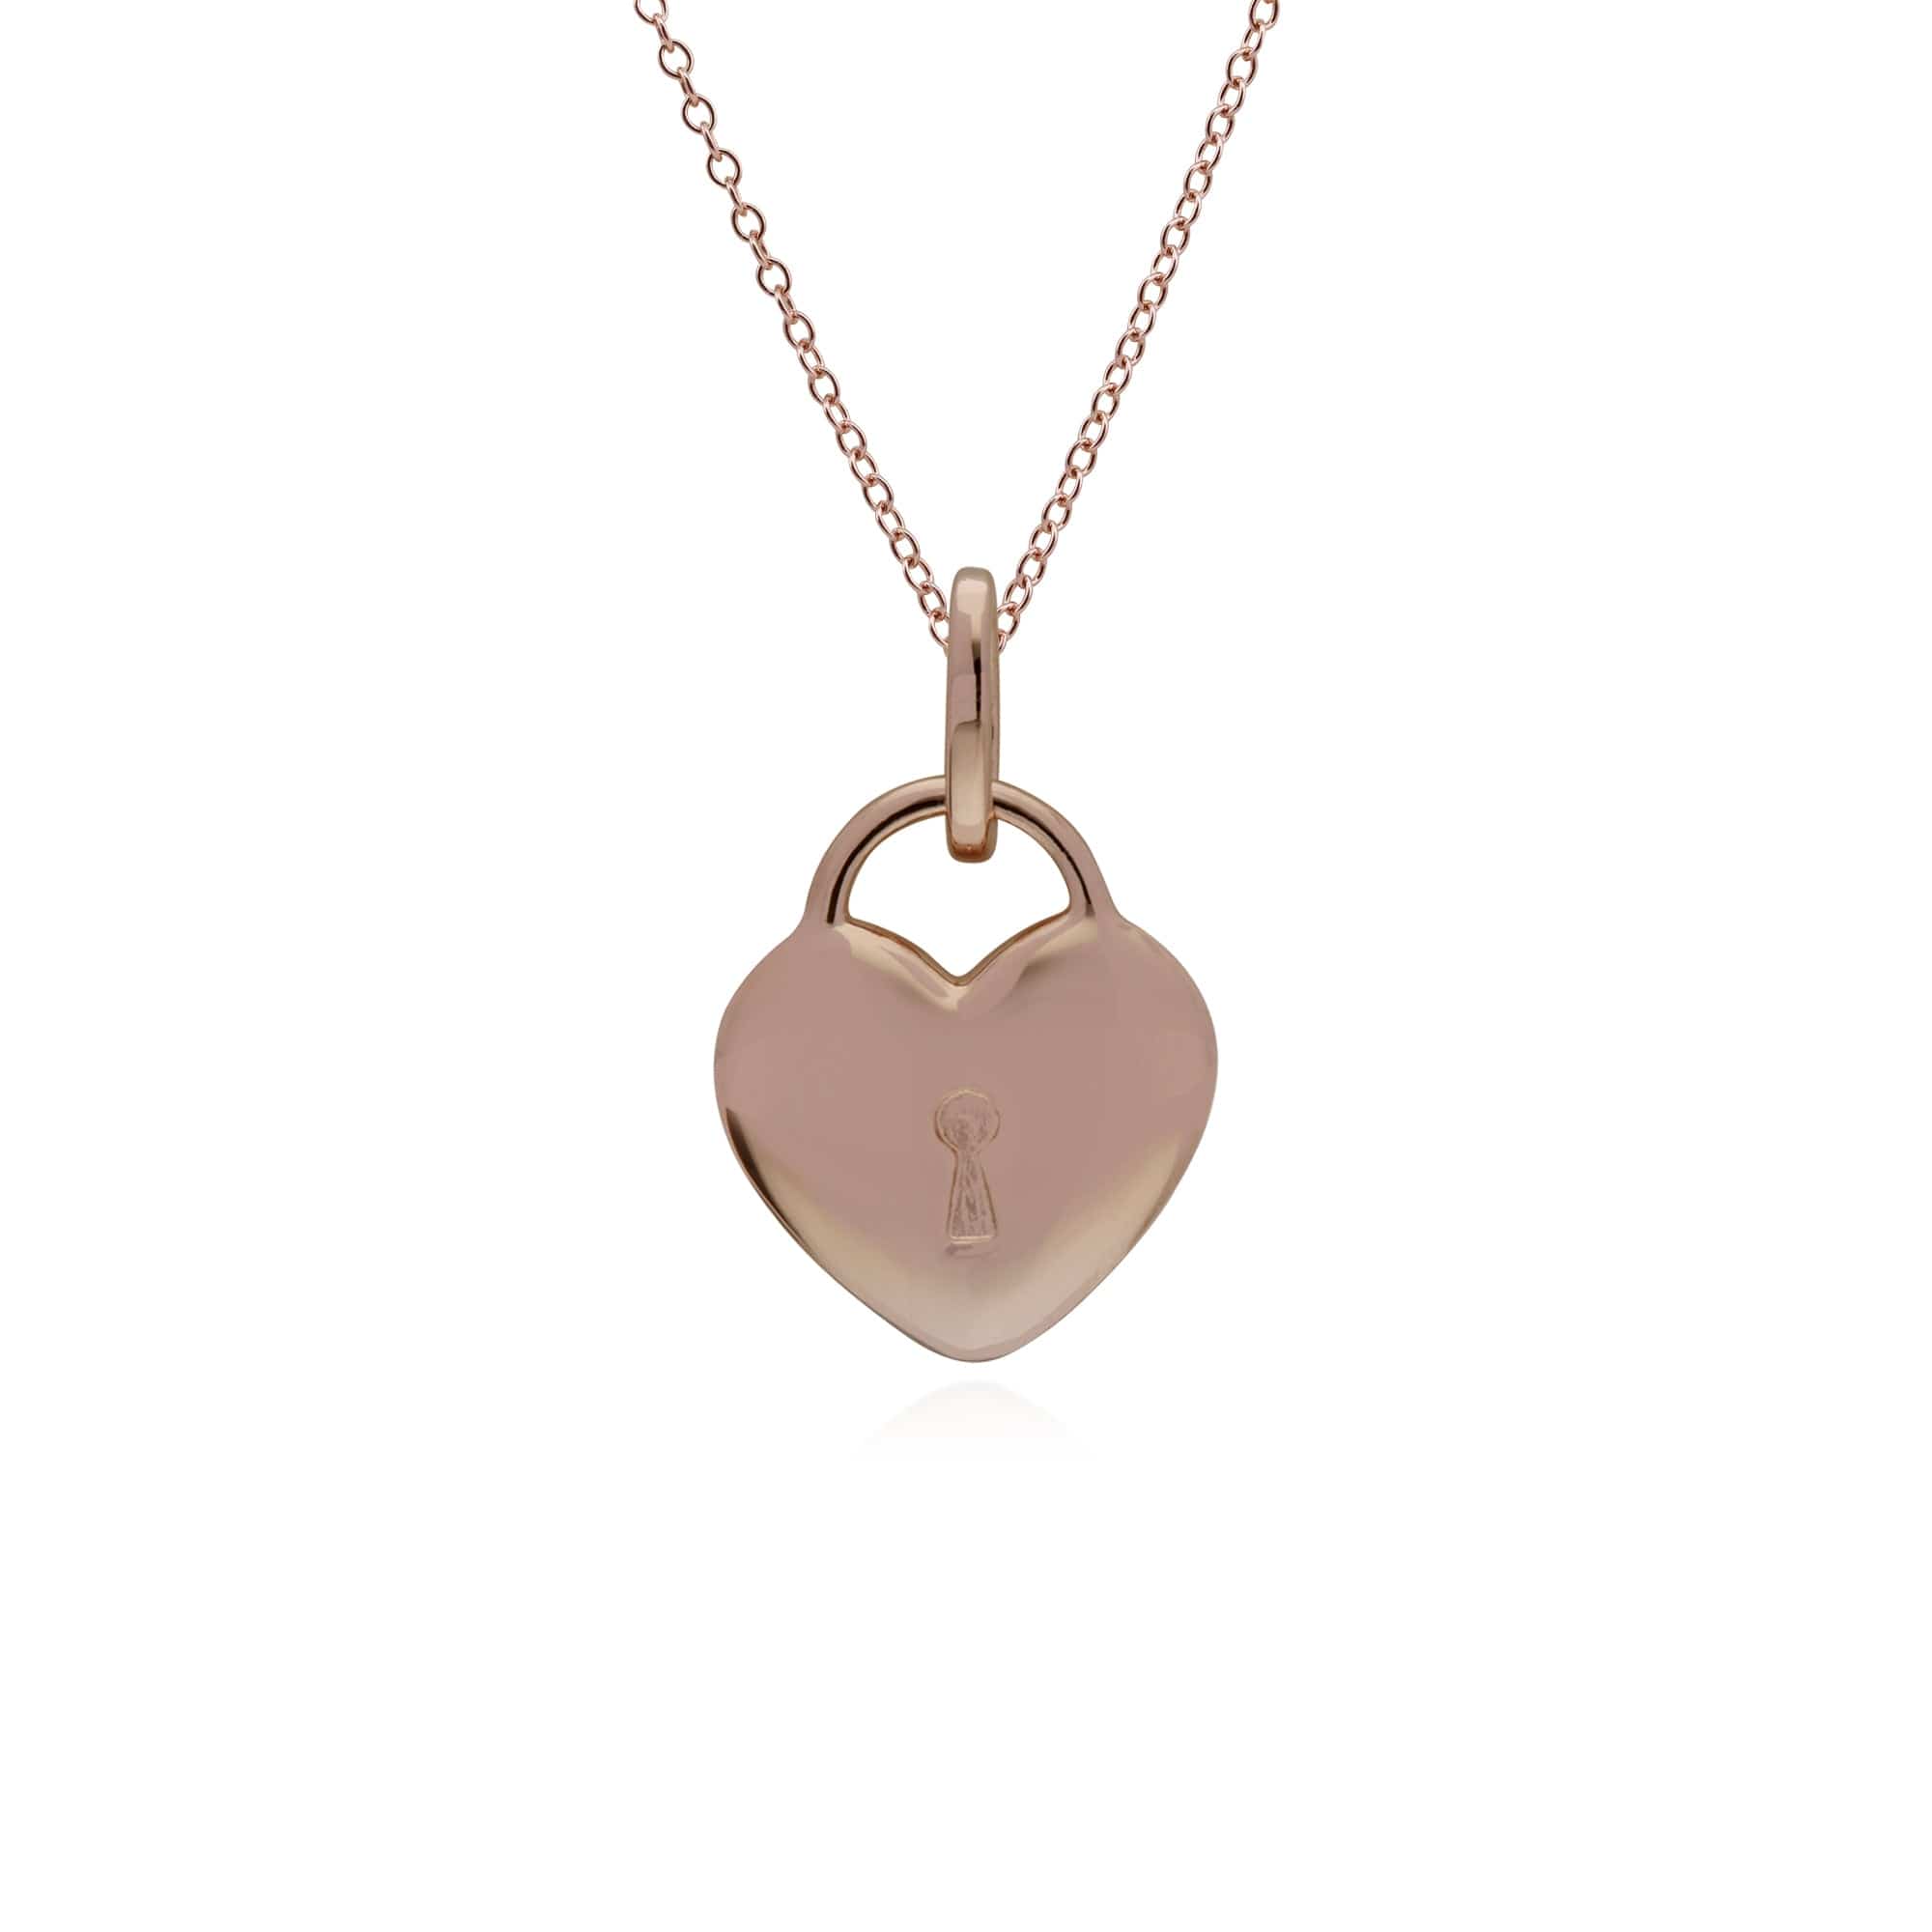 270P027309925-270P026901925 Classic Heart Lock Pendant & Ruby Charm in Rose Gold Plated 925 Sterling Silver 3